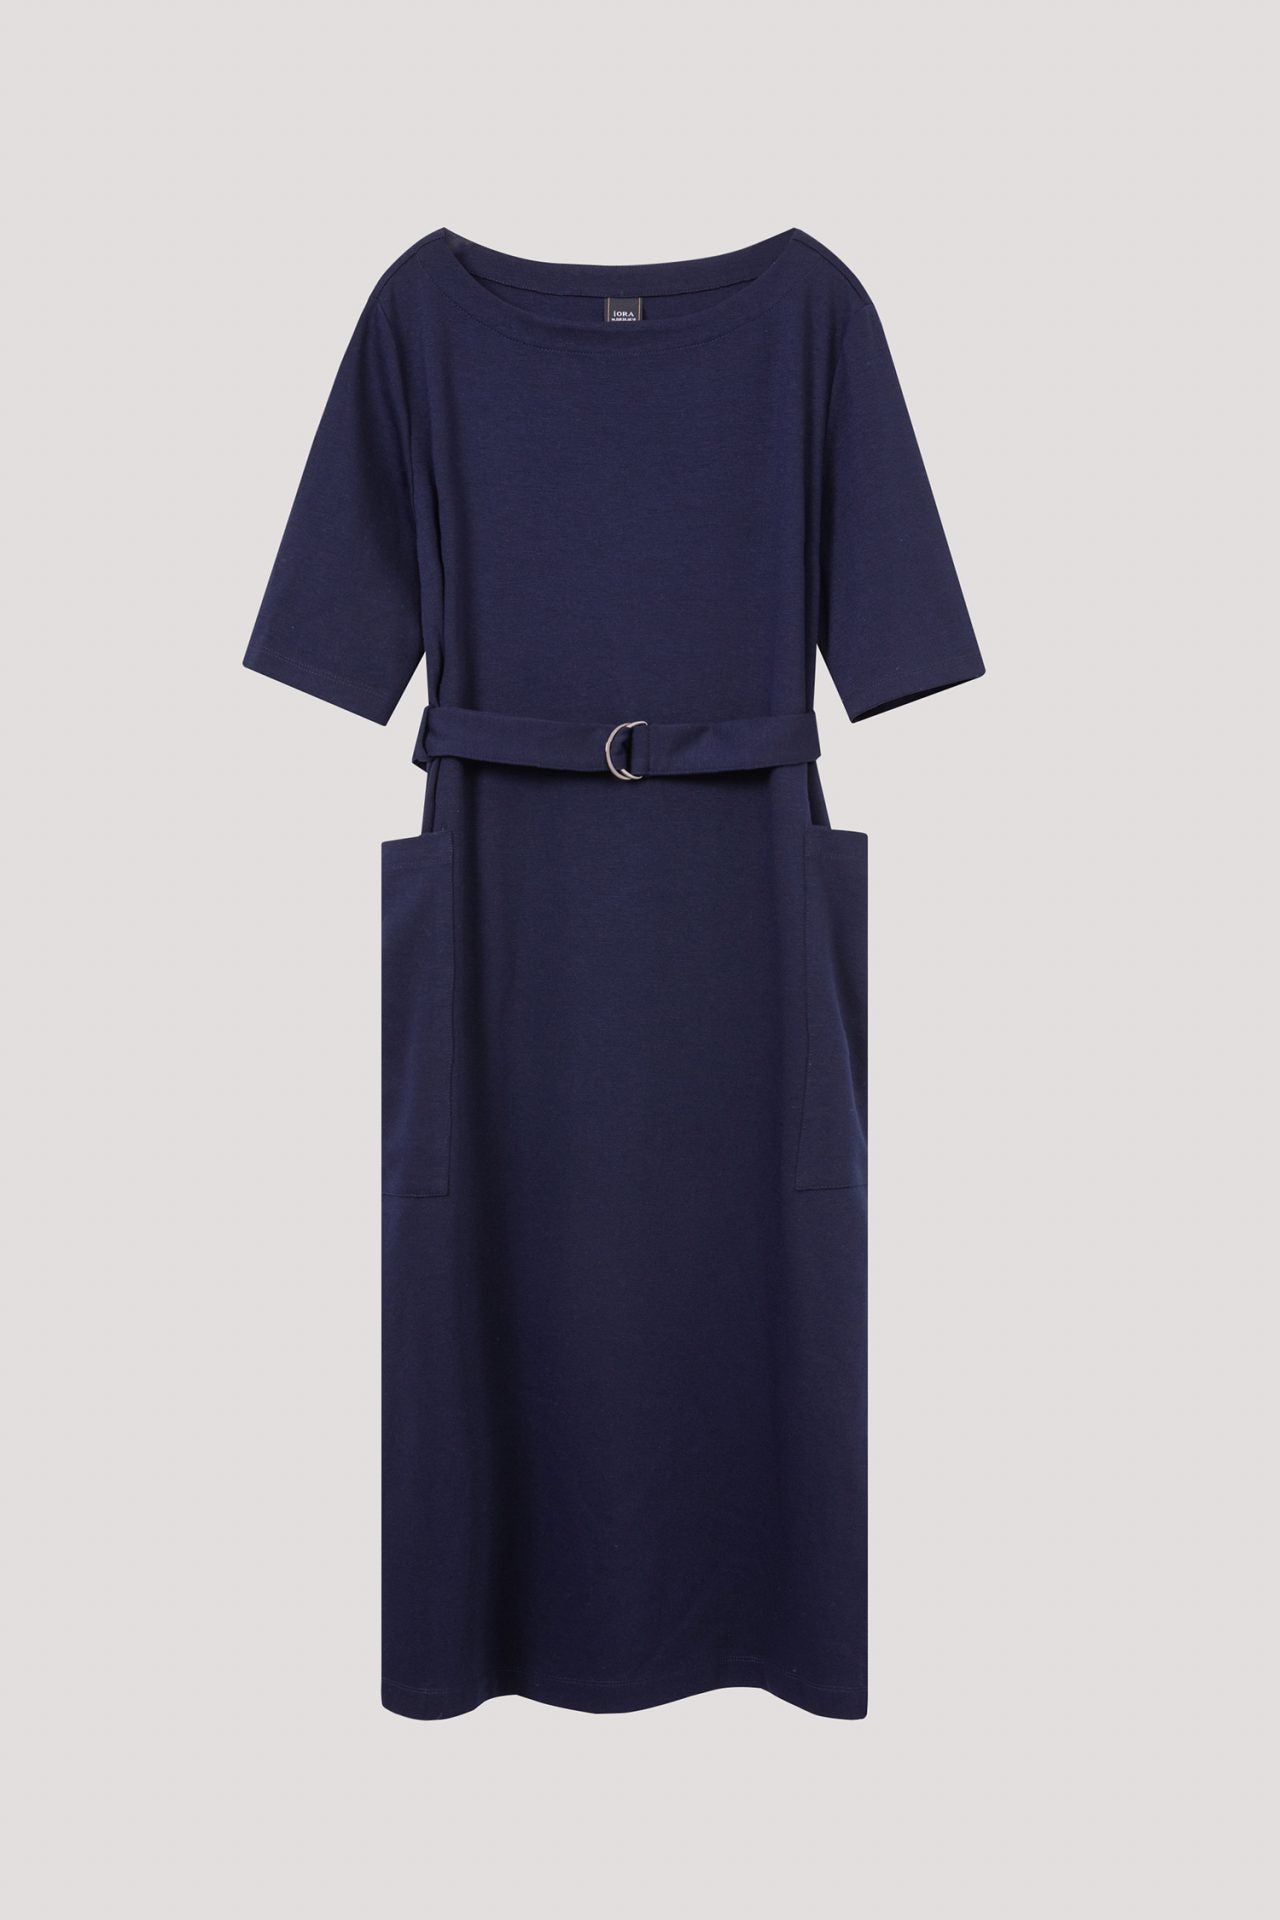 ATD 10756 D-RING SASHED DRESS NAVY